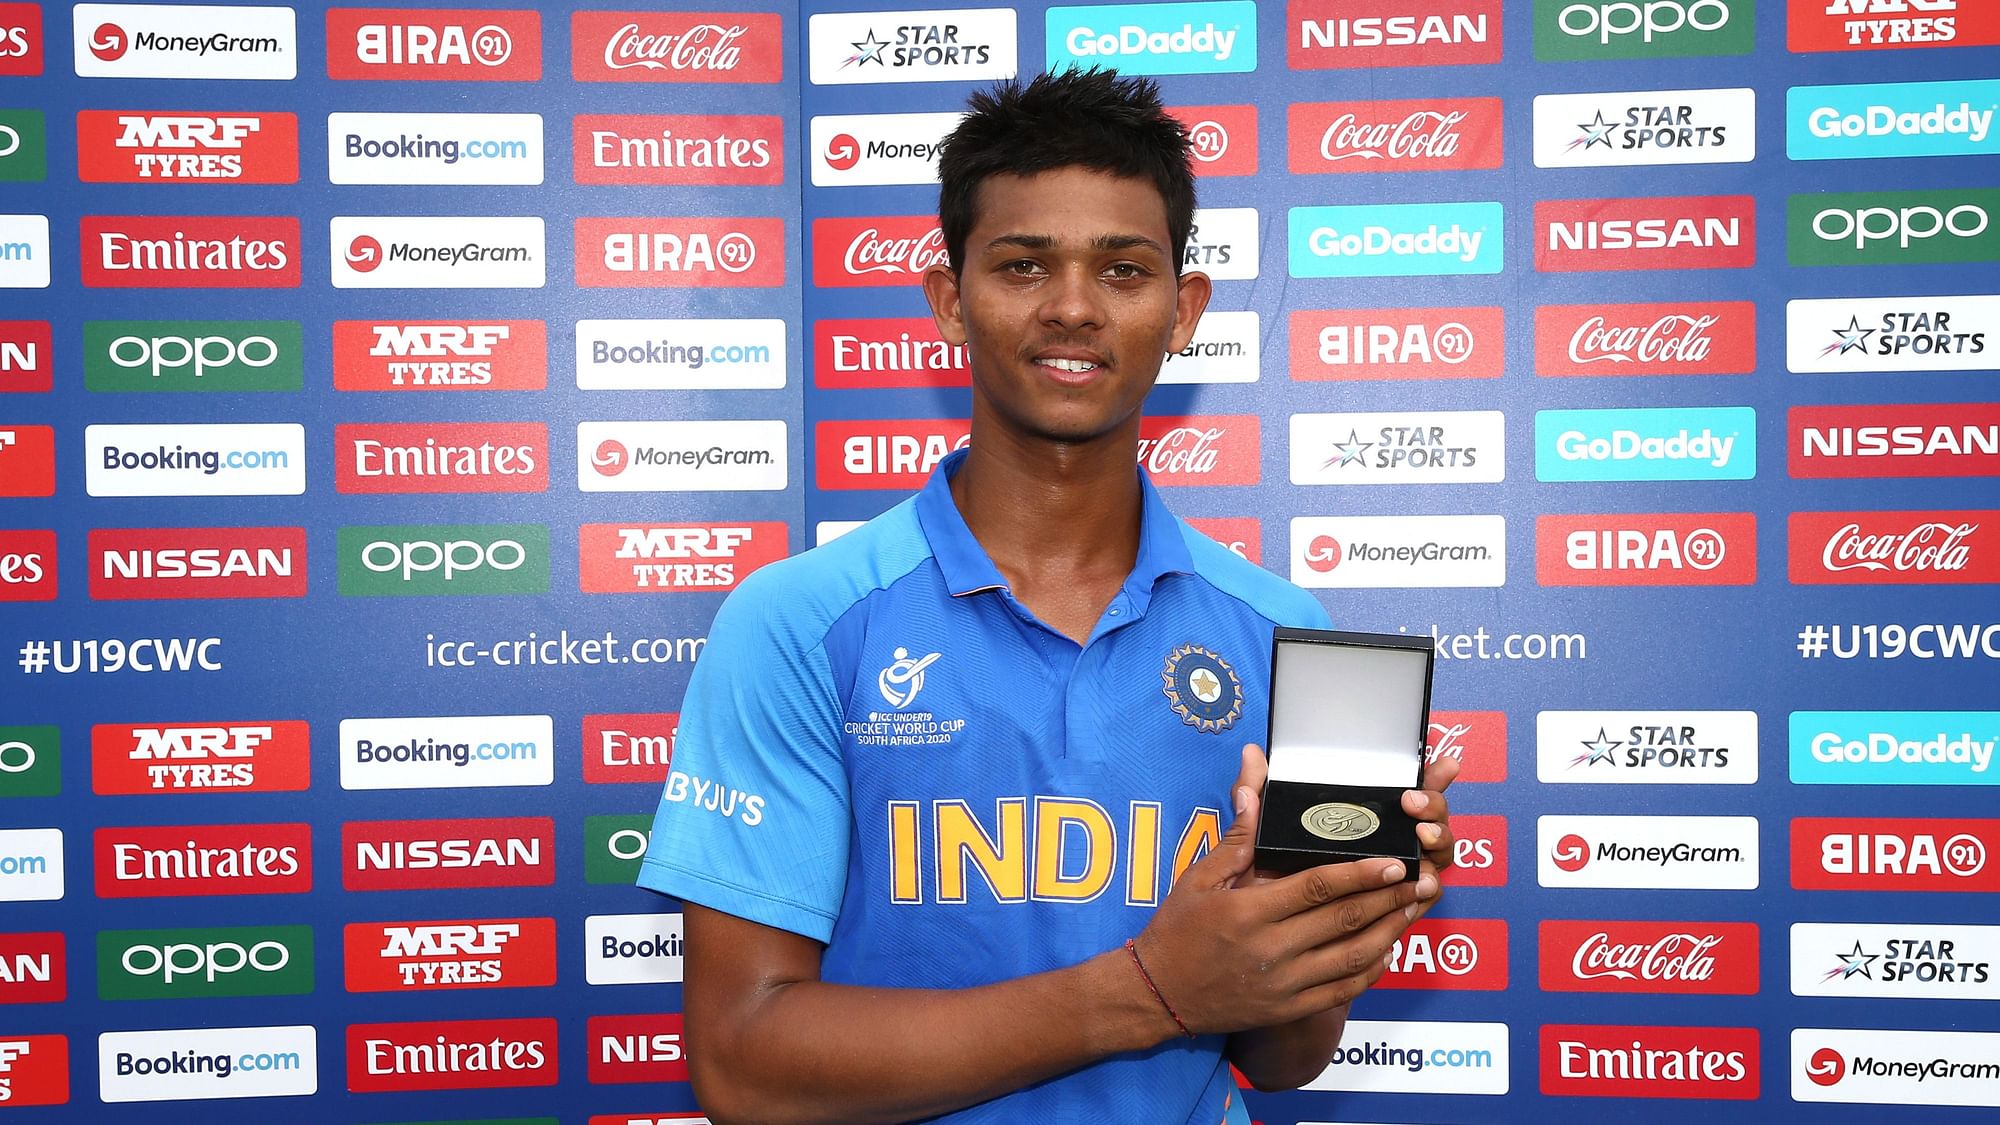 Yashasvi Jaiswal stood out once again and was adjudged the man of the tournament in the ICC U-19 World Cup.